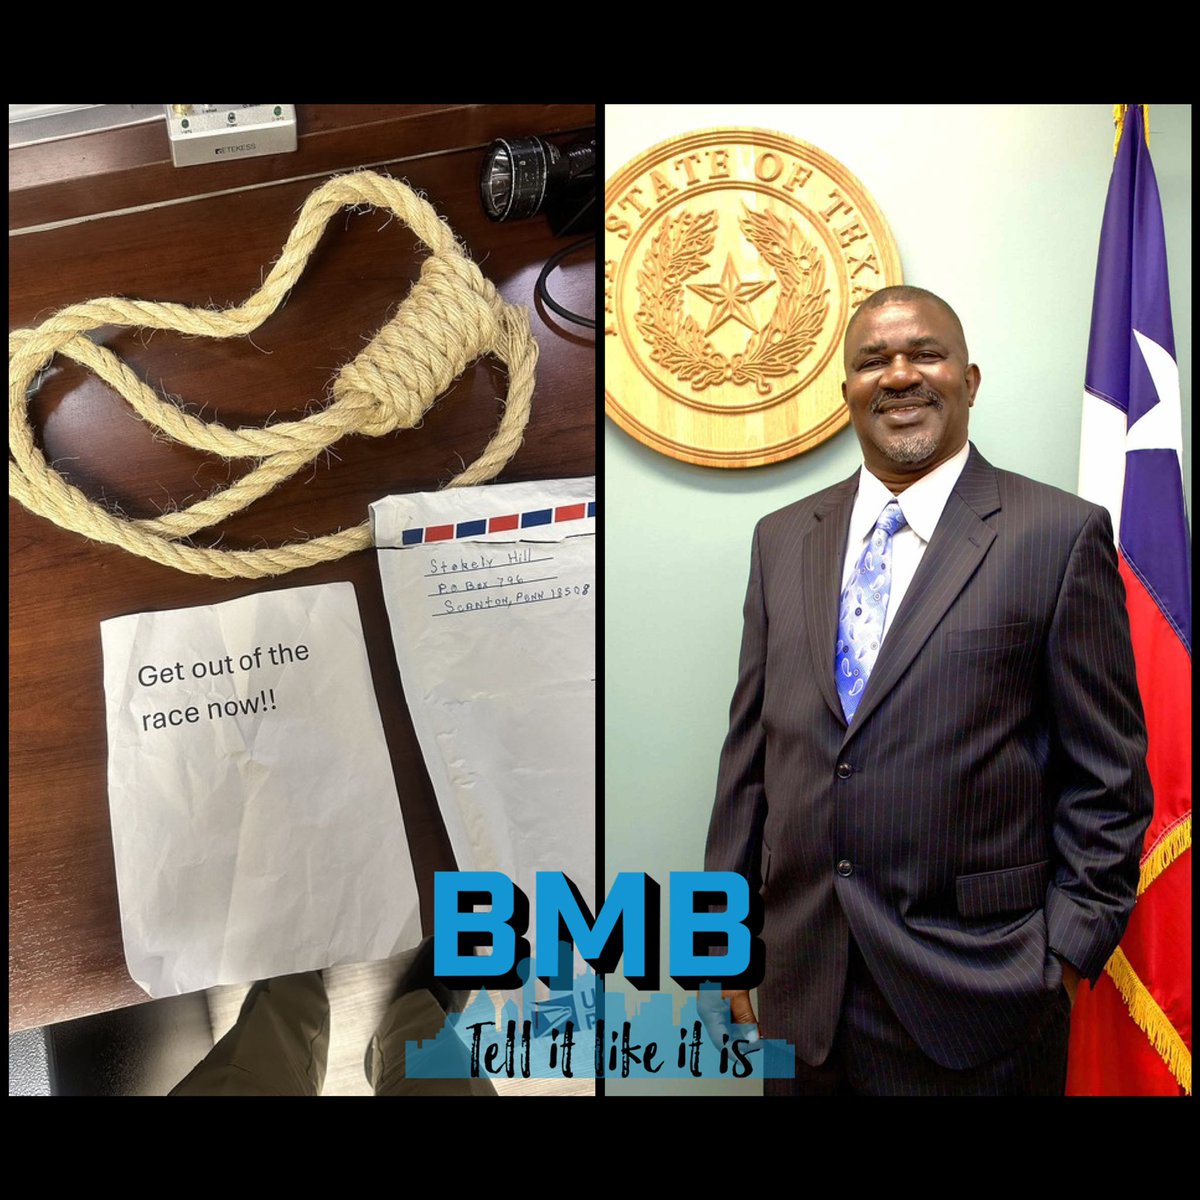 #ARCOLA #MAYOR GETS NOOSE DELIVERED TO #CITYHALL WITH THREATENING NOTE AHEAD OF #ELECTIONS

abc13.com/arcola-mayor-f…